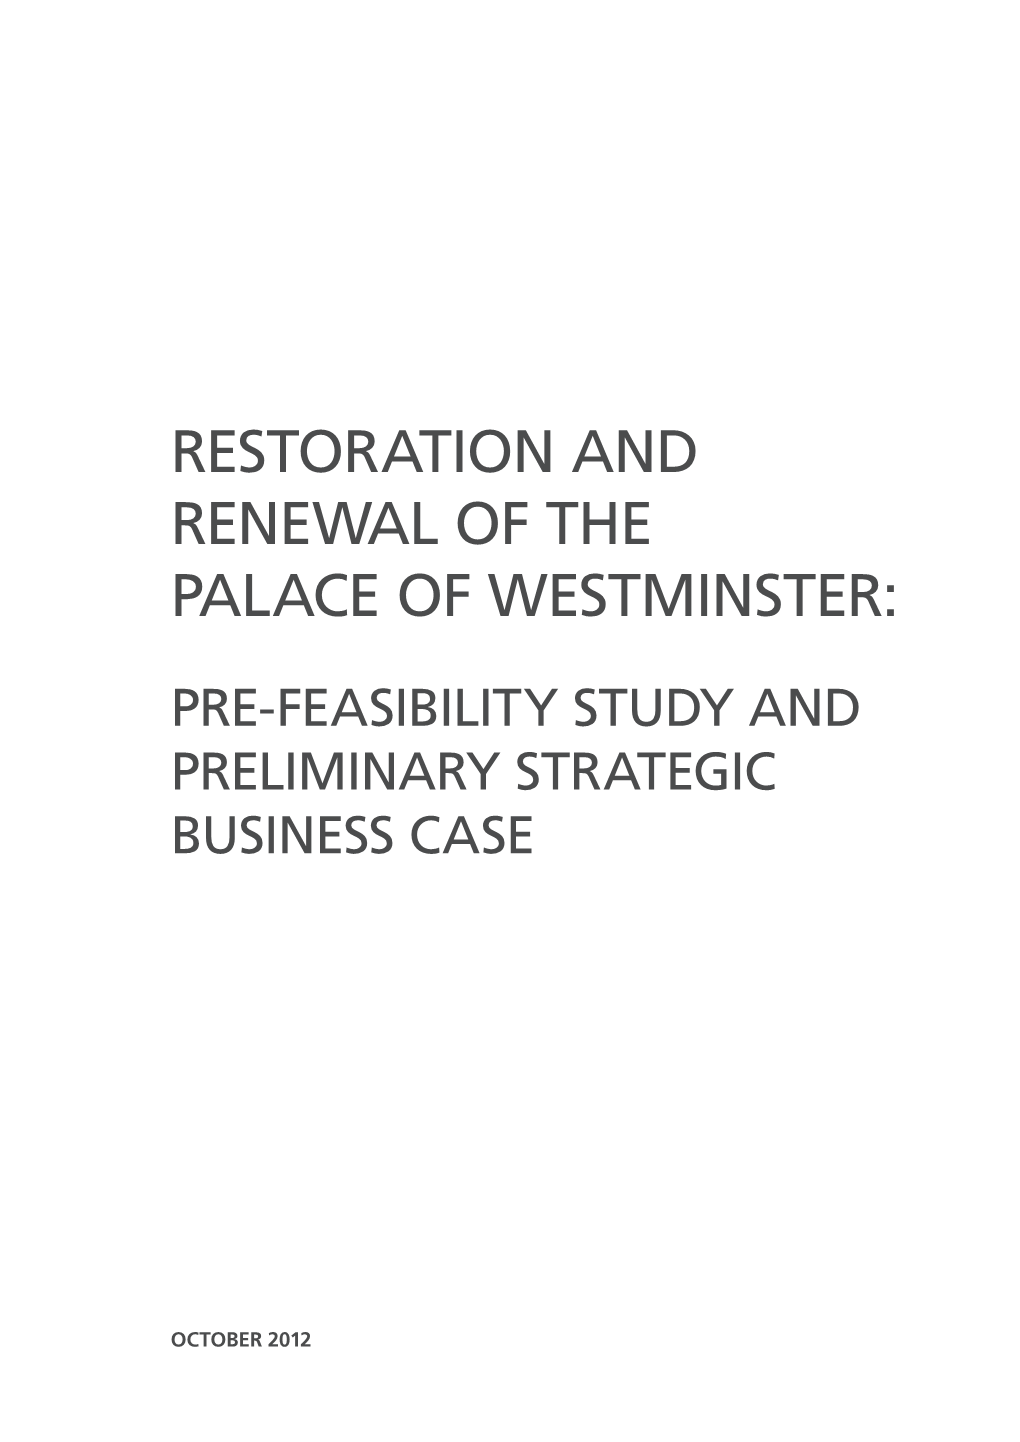 Pre-Feasibility Study and Preliminary Strategic Business Case